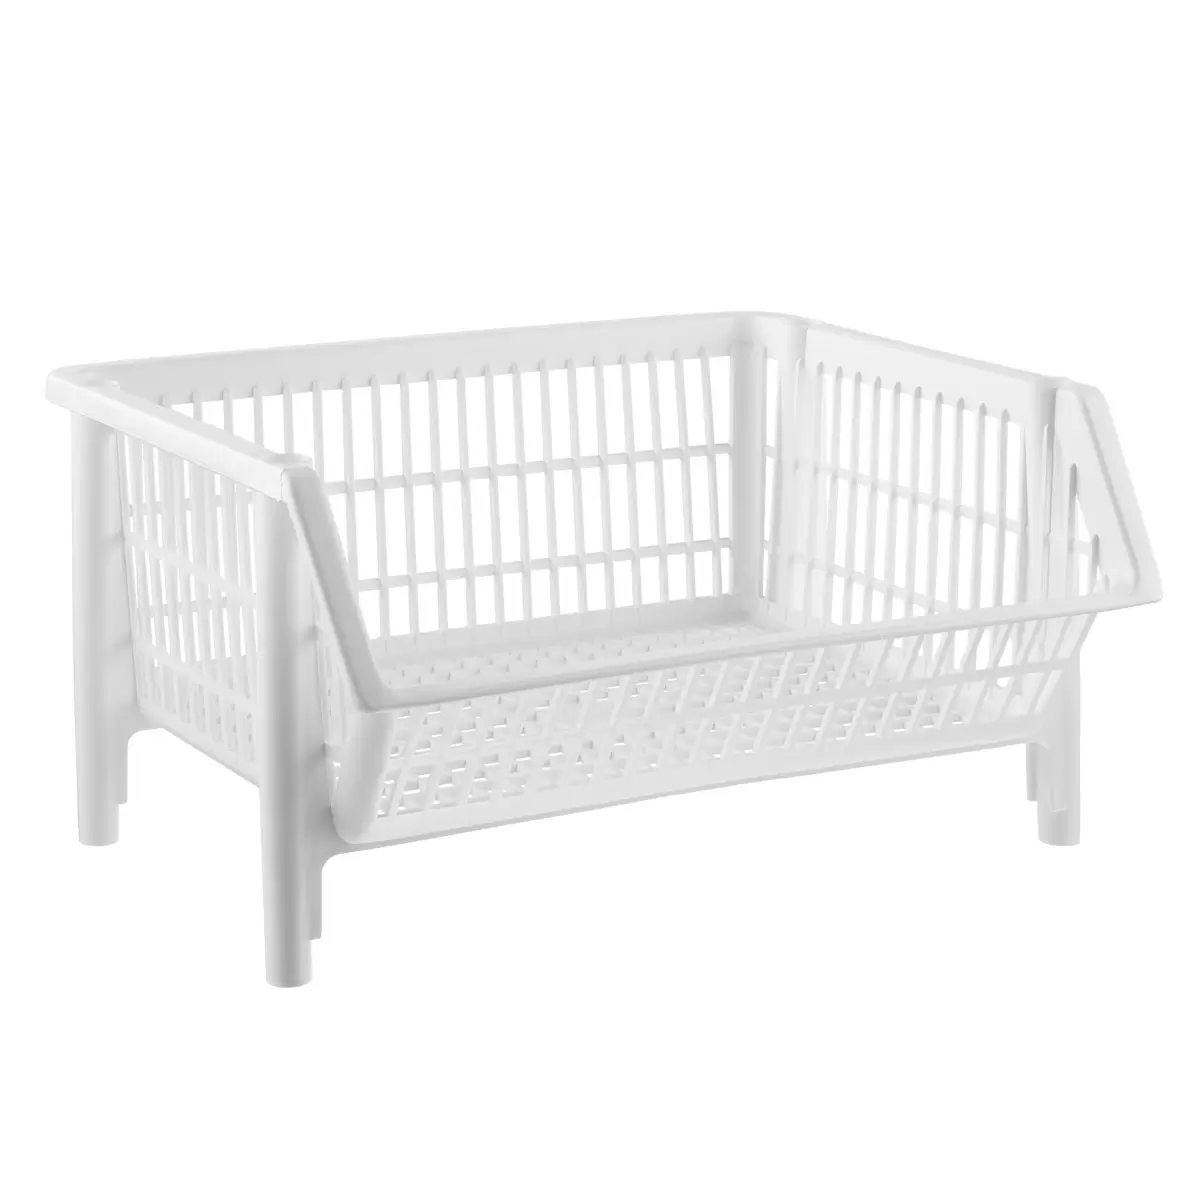 https://www.containerstore.com/catalogimages/401399/133700_our_large_stack_basket_white.jpg